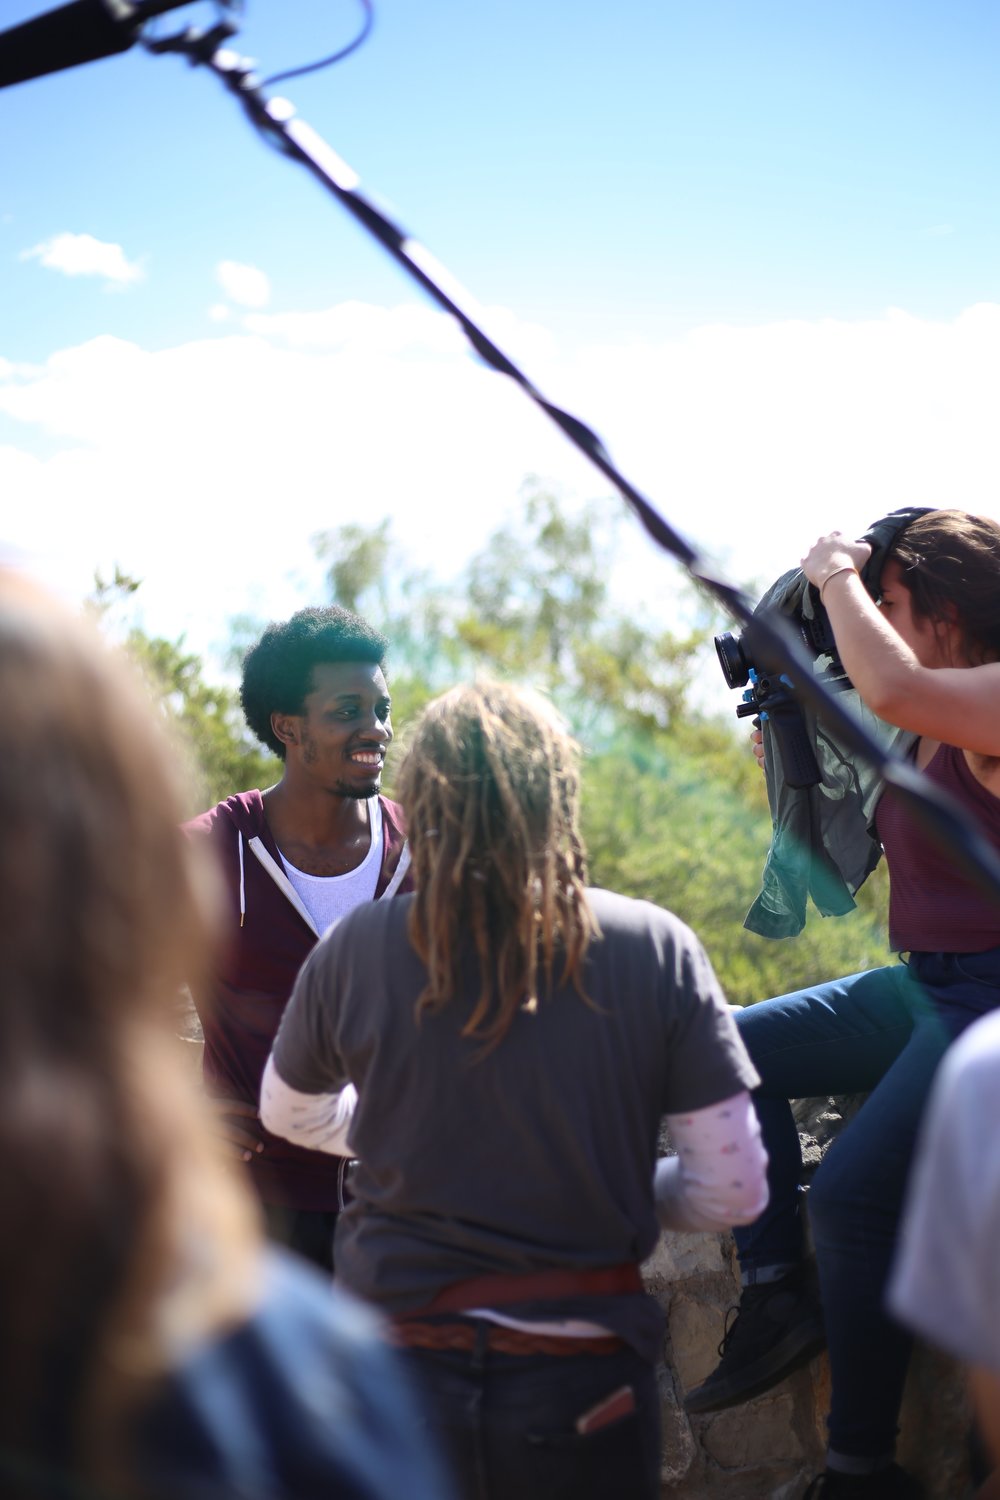 Julian Alexander on the set with other filmmakers and crew members.